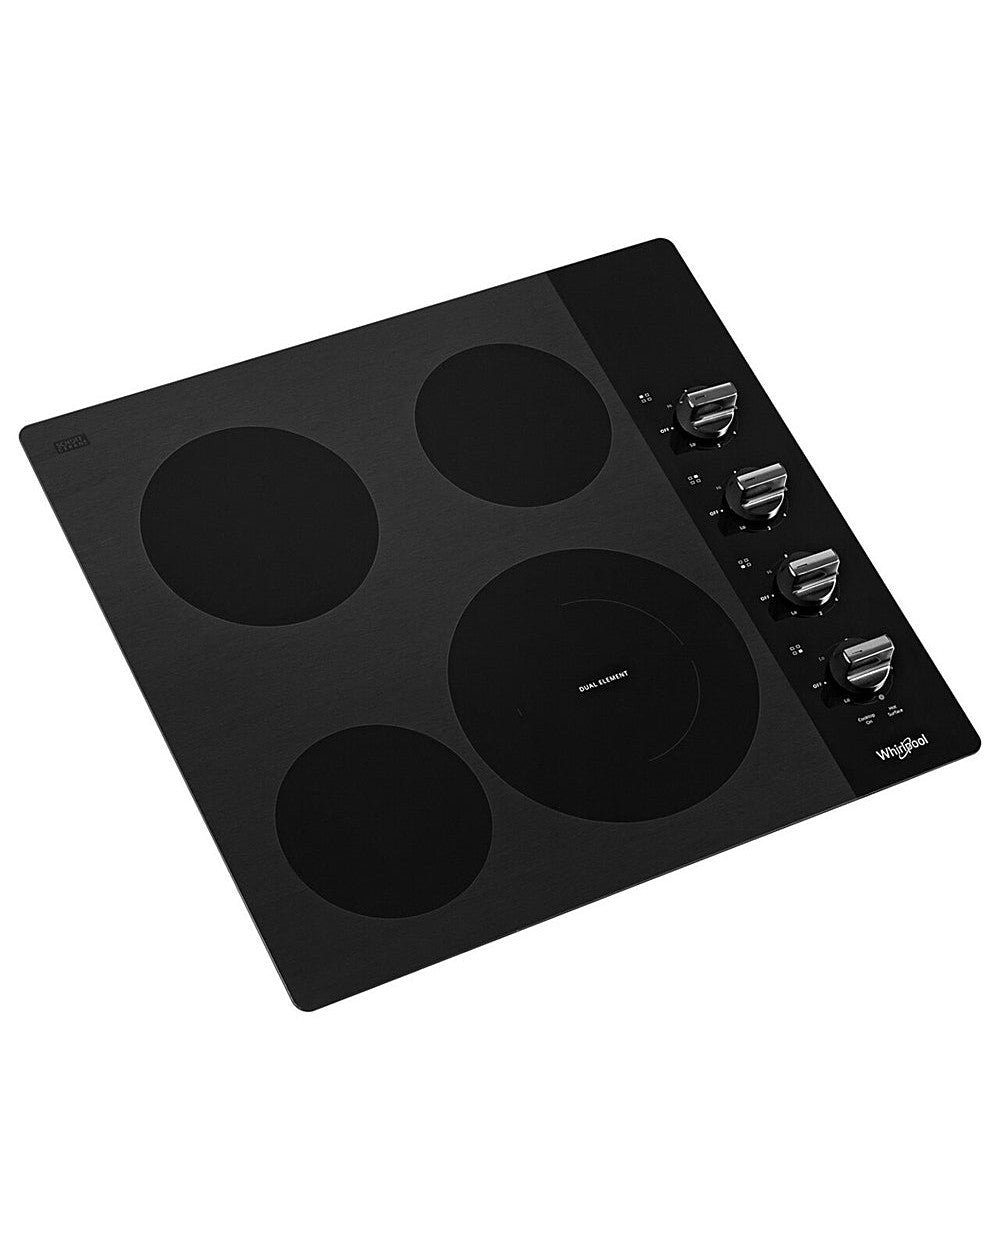 WHIRLPOOL WCE55US4HB 24-inch Compact Electric Ceramic Glass Cooktop